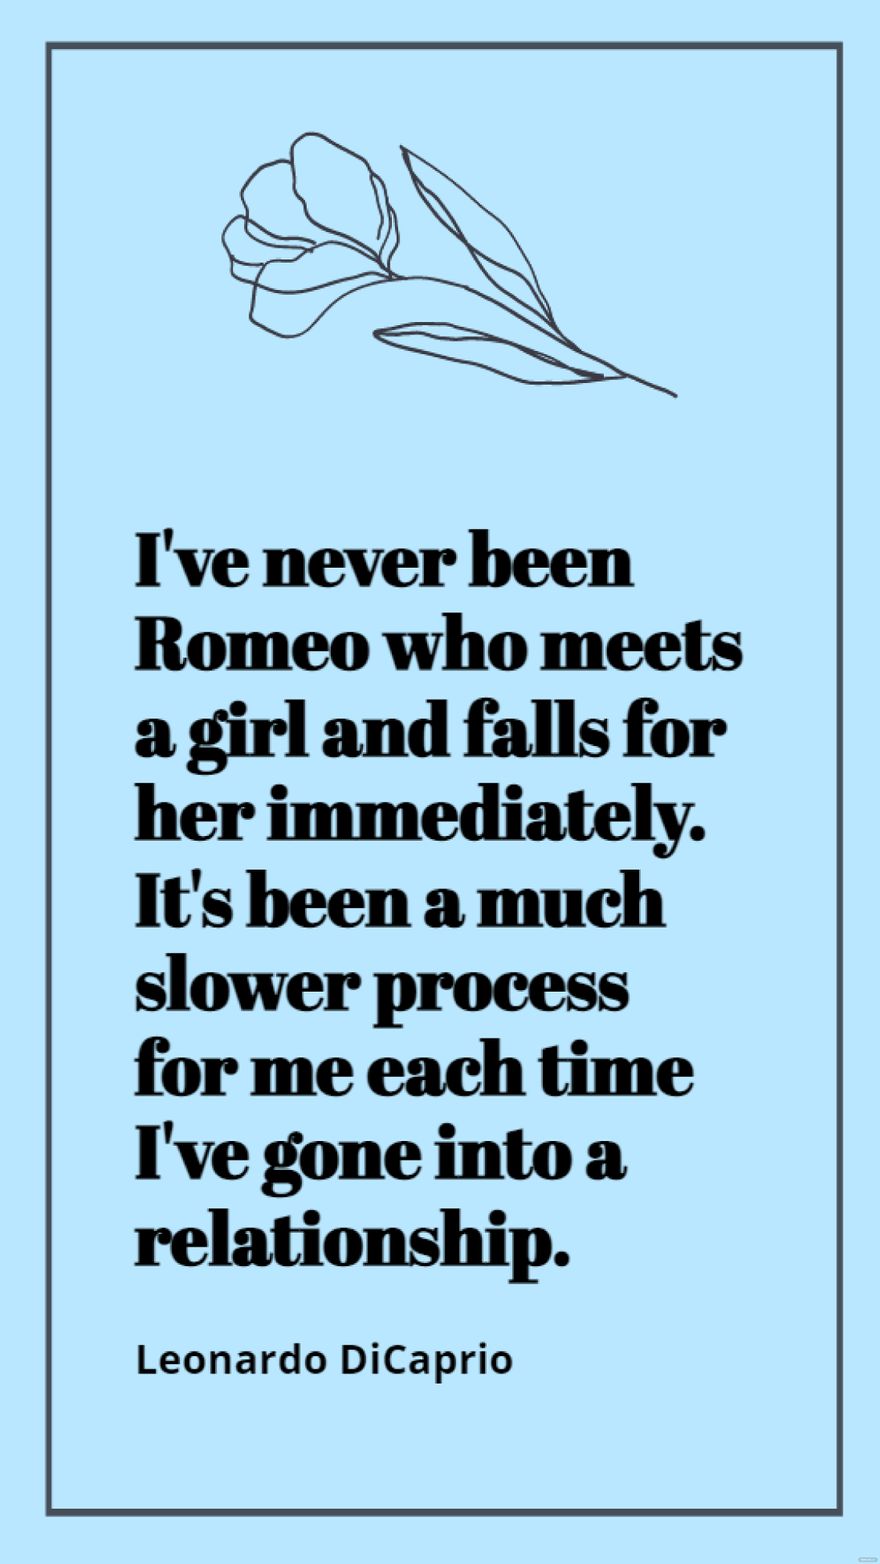 Leonardo DiCaprio - I've never been Romeo who meets a girl and falls for her immediately. It's been a much slower process for me each time I've gone into a relationship.